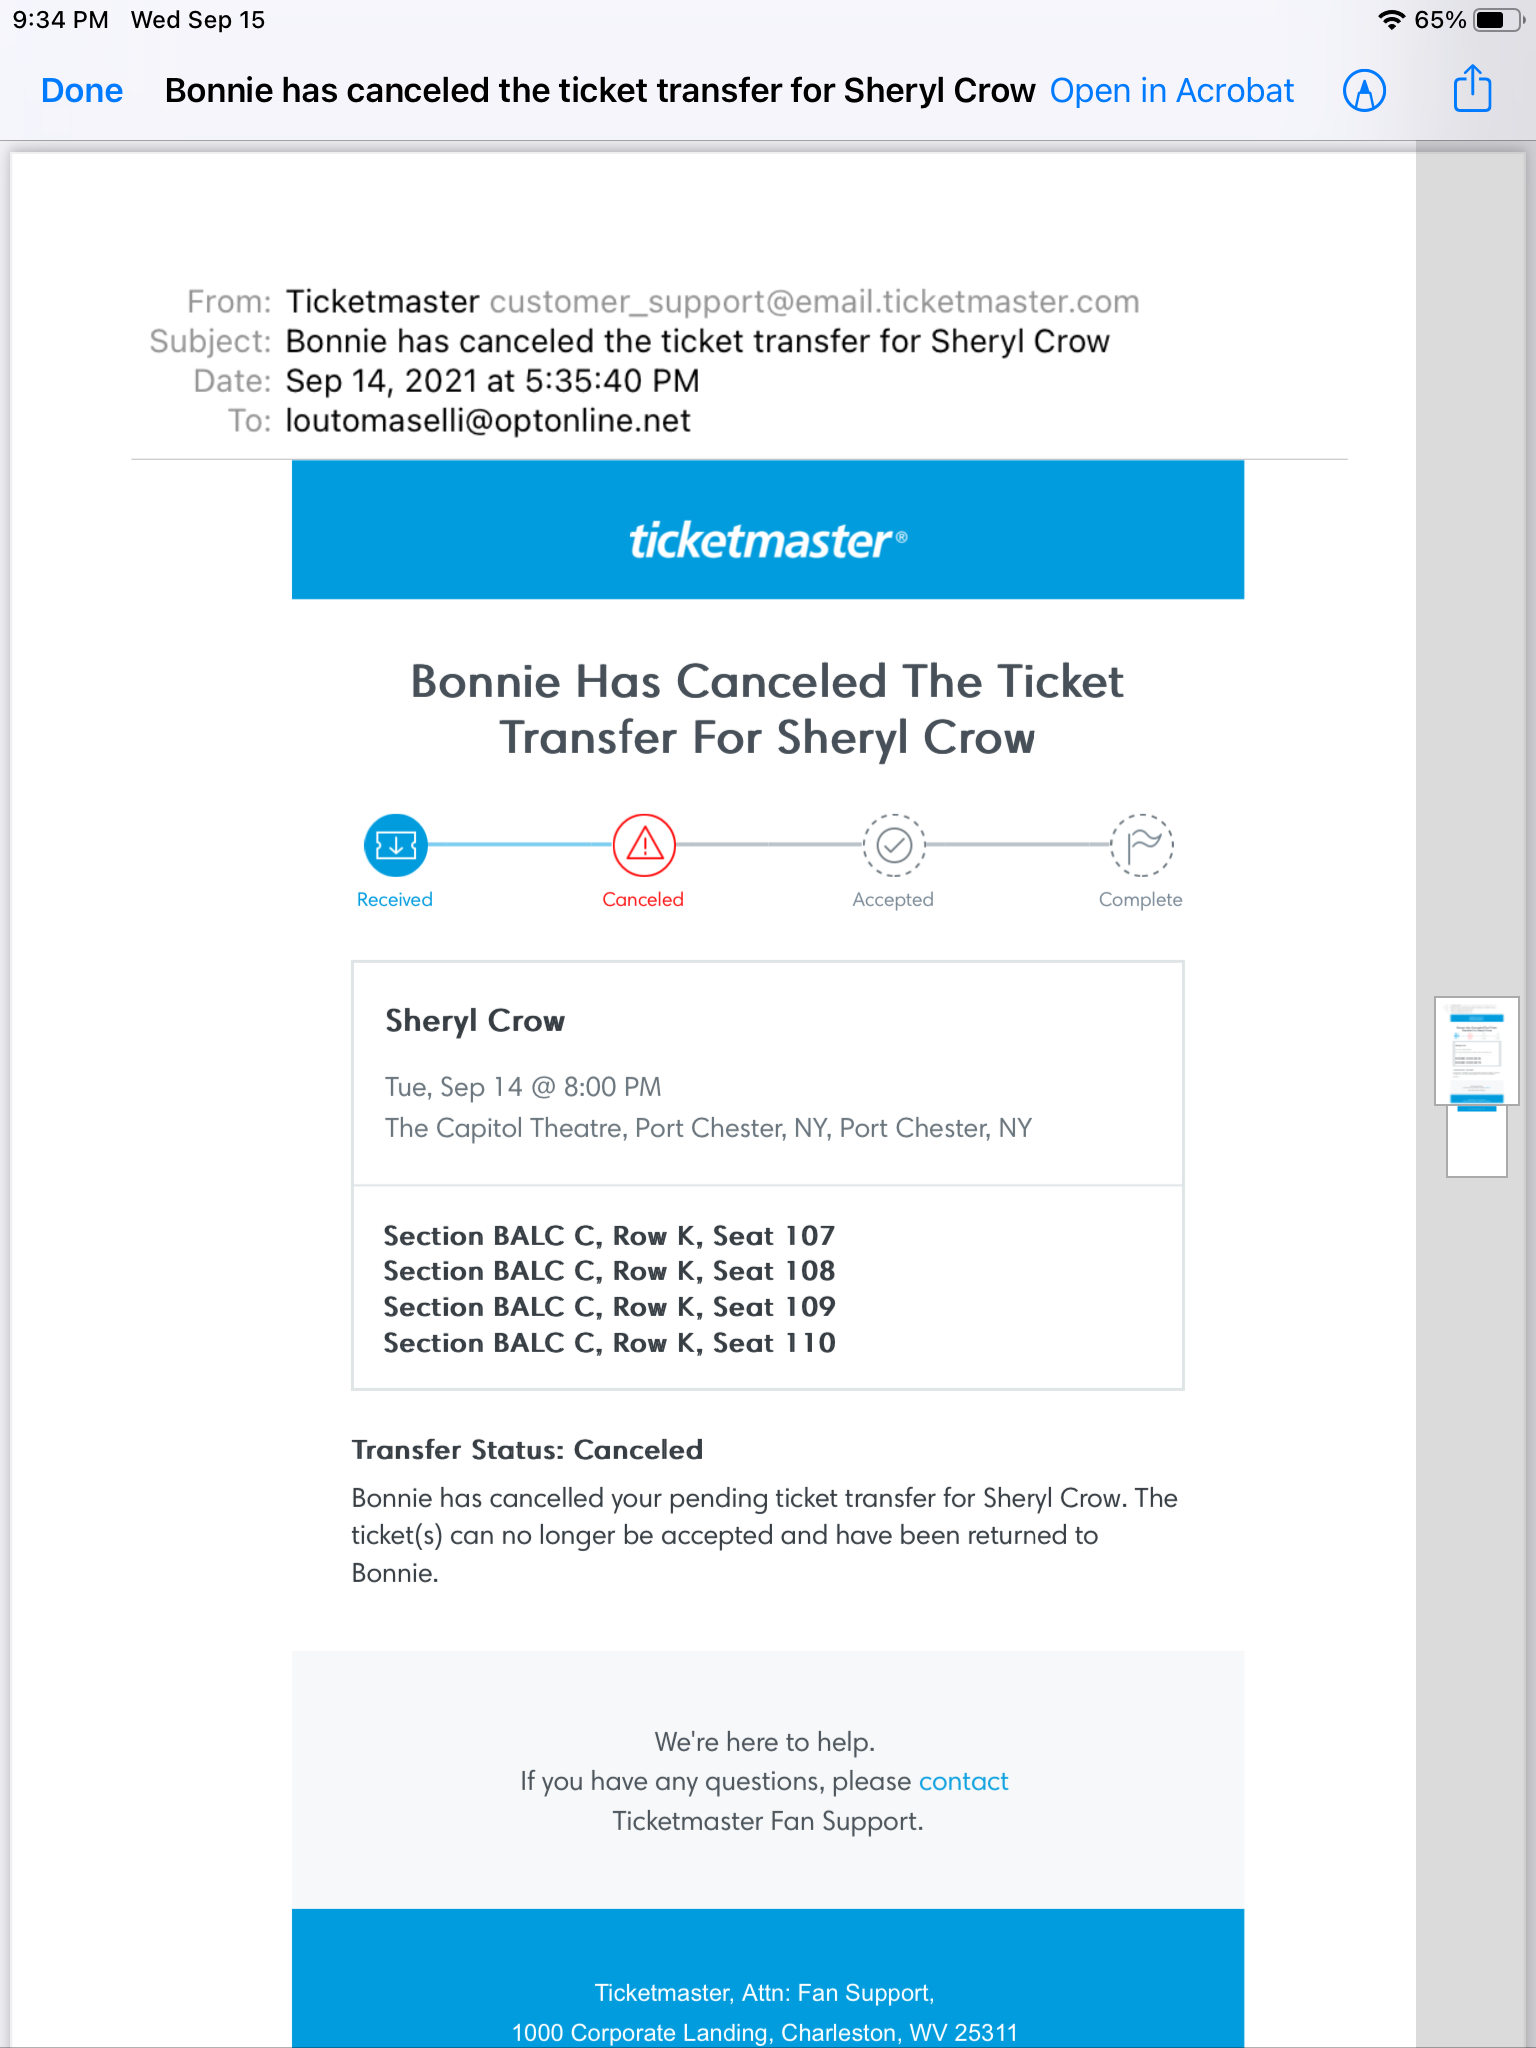 OnlineCityTickets.com complaint Never Received Tickets